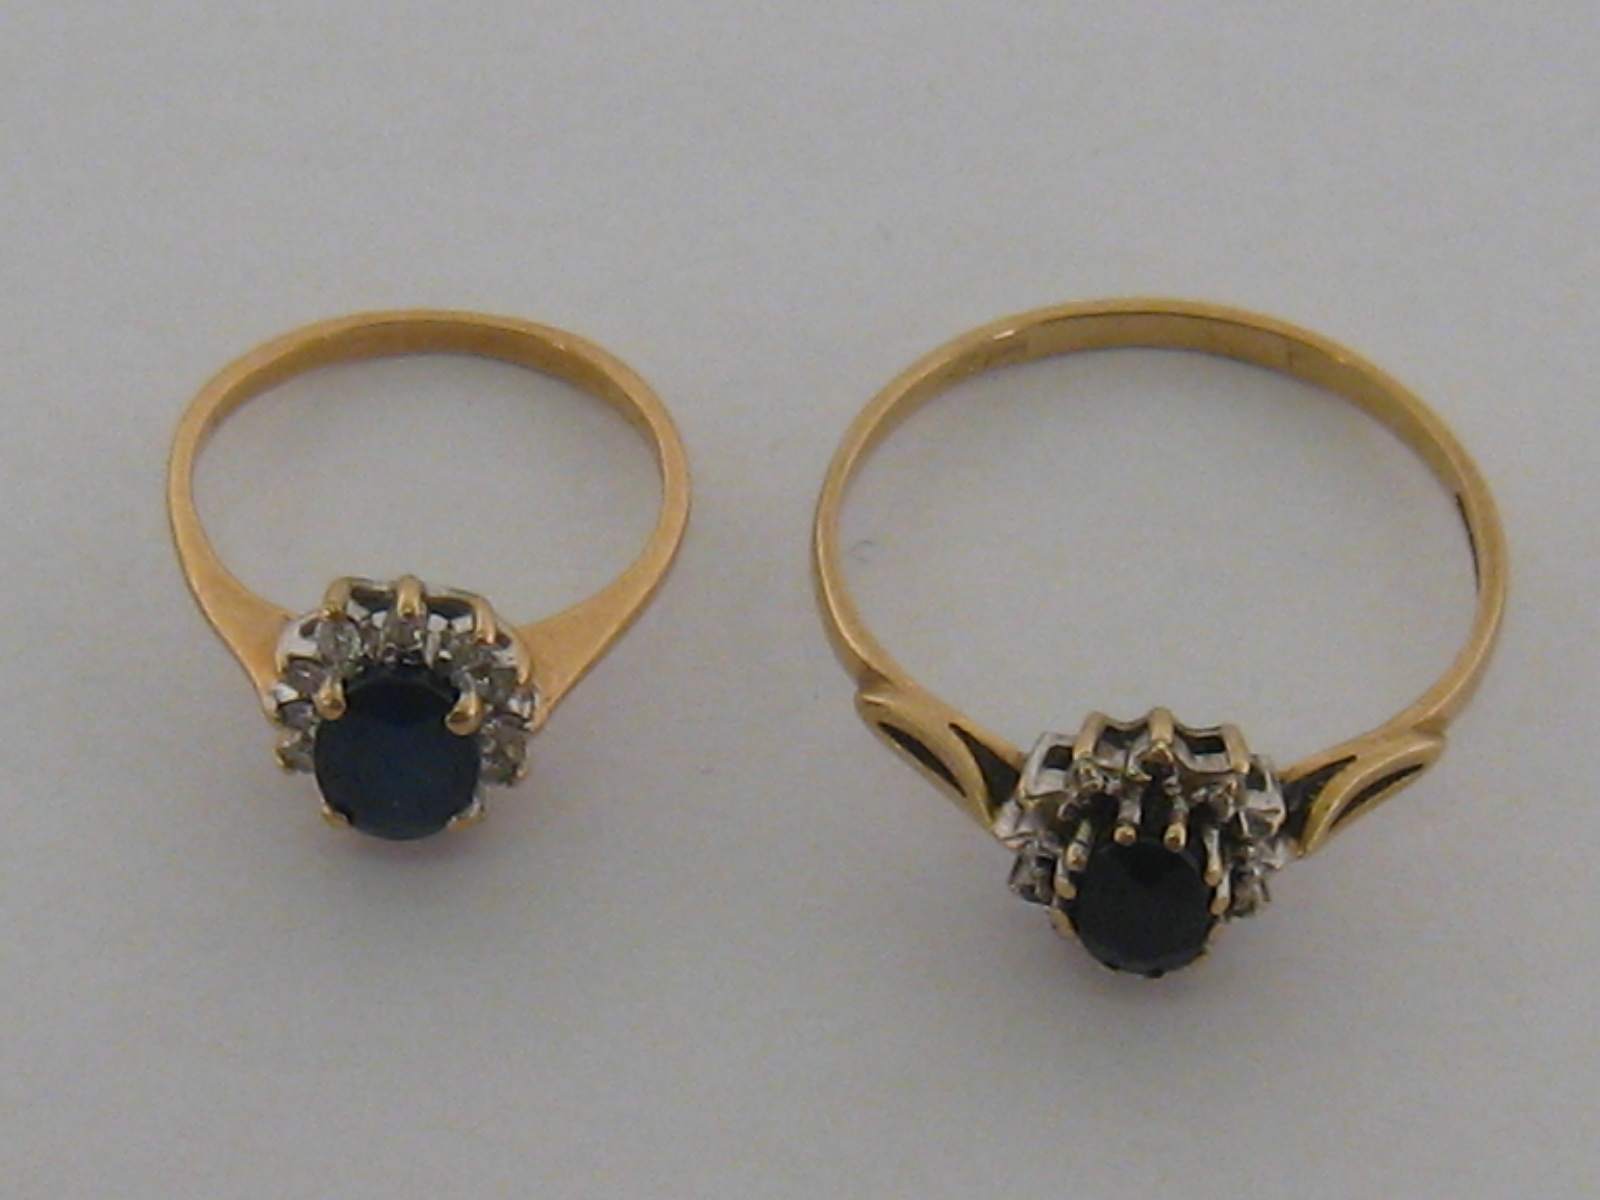 Two sapphire and diamond cluster rings, the first with a 7.4mm x 5.